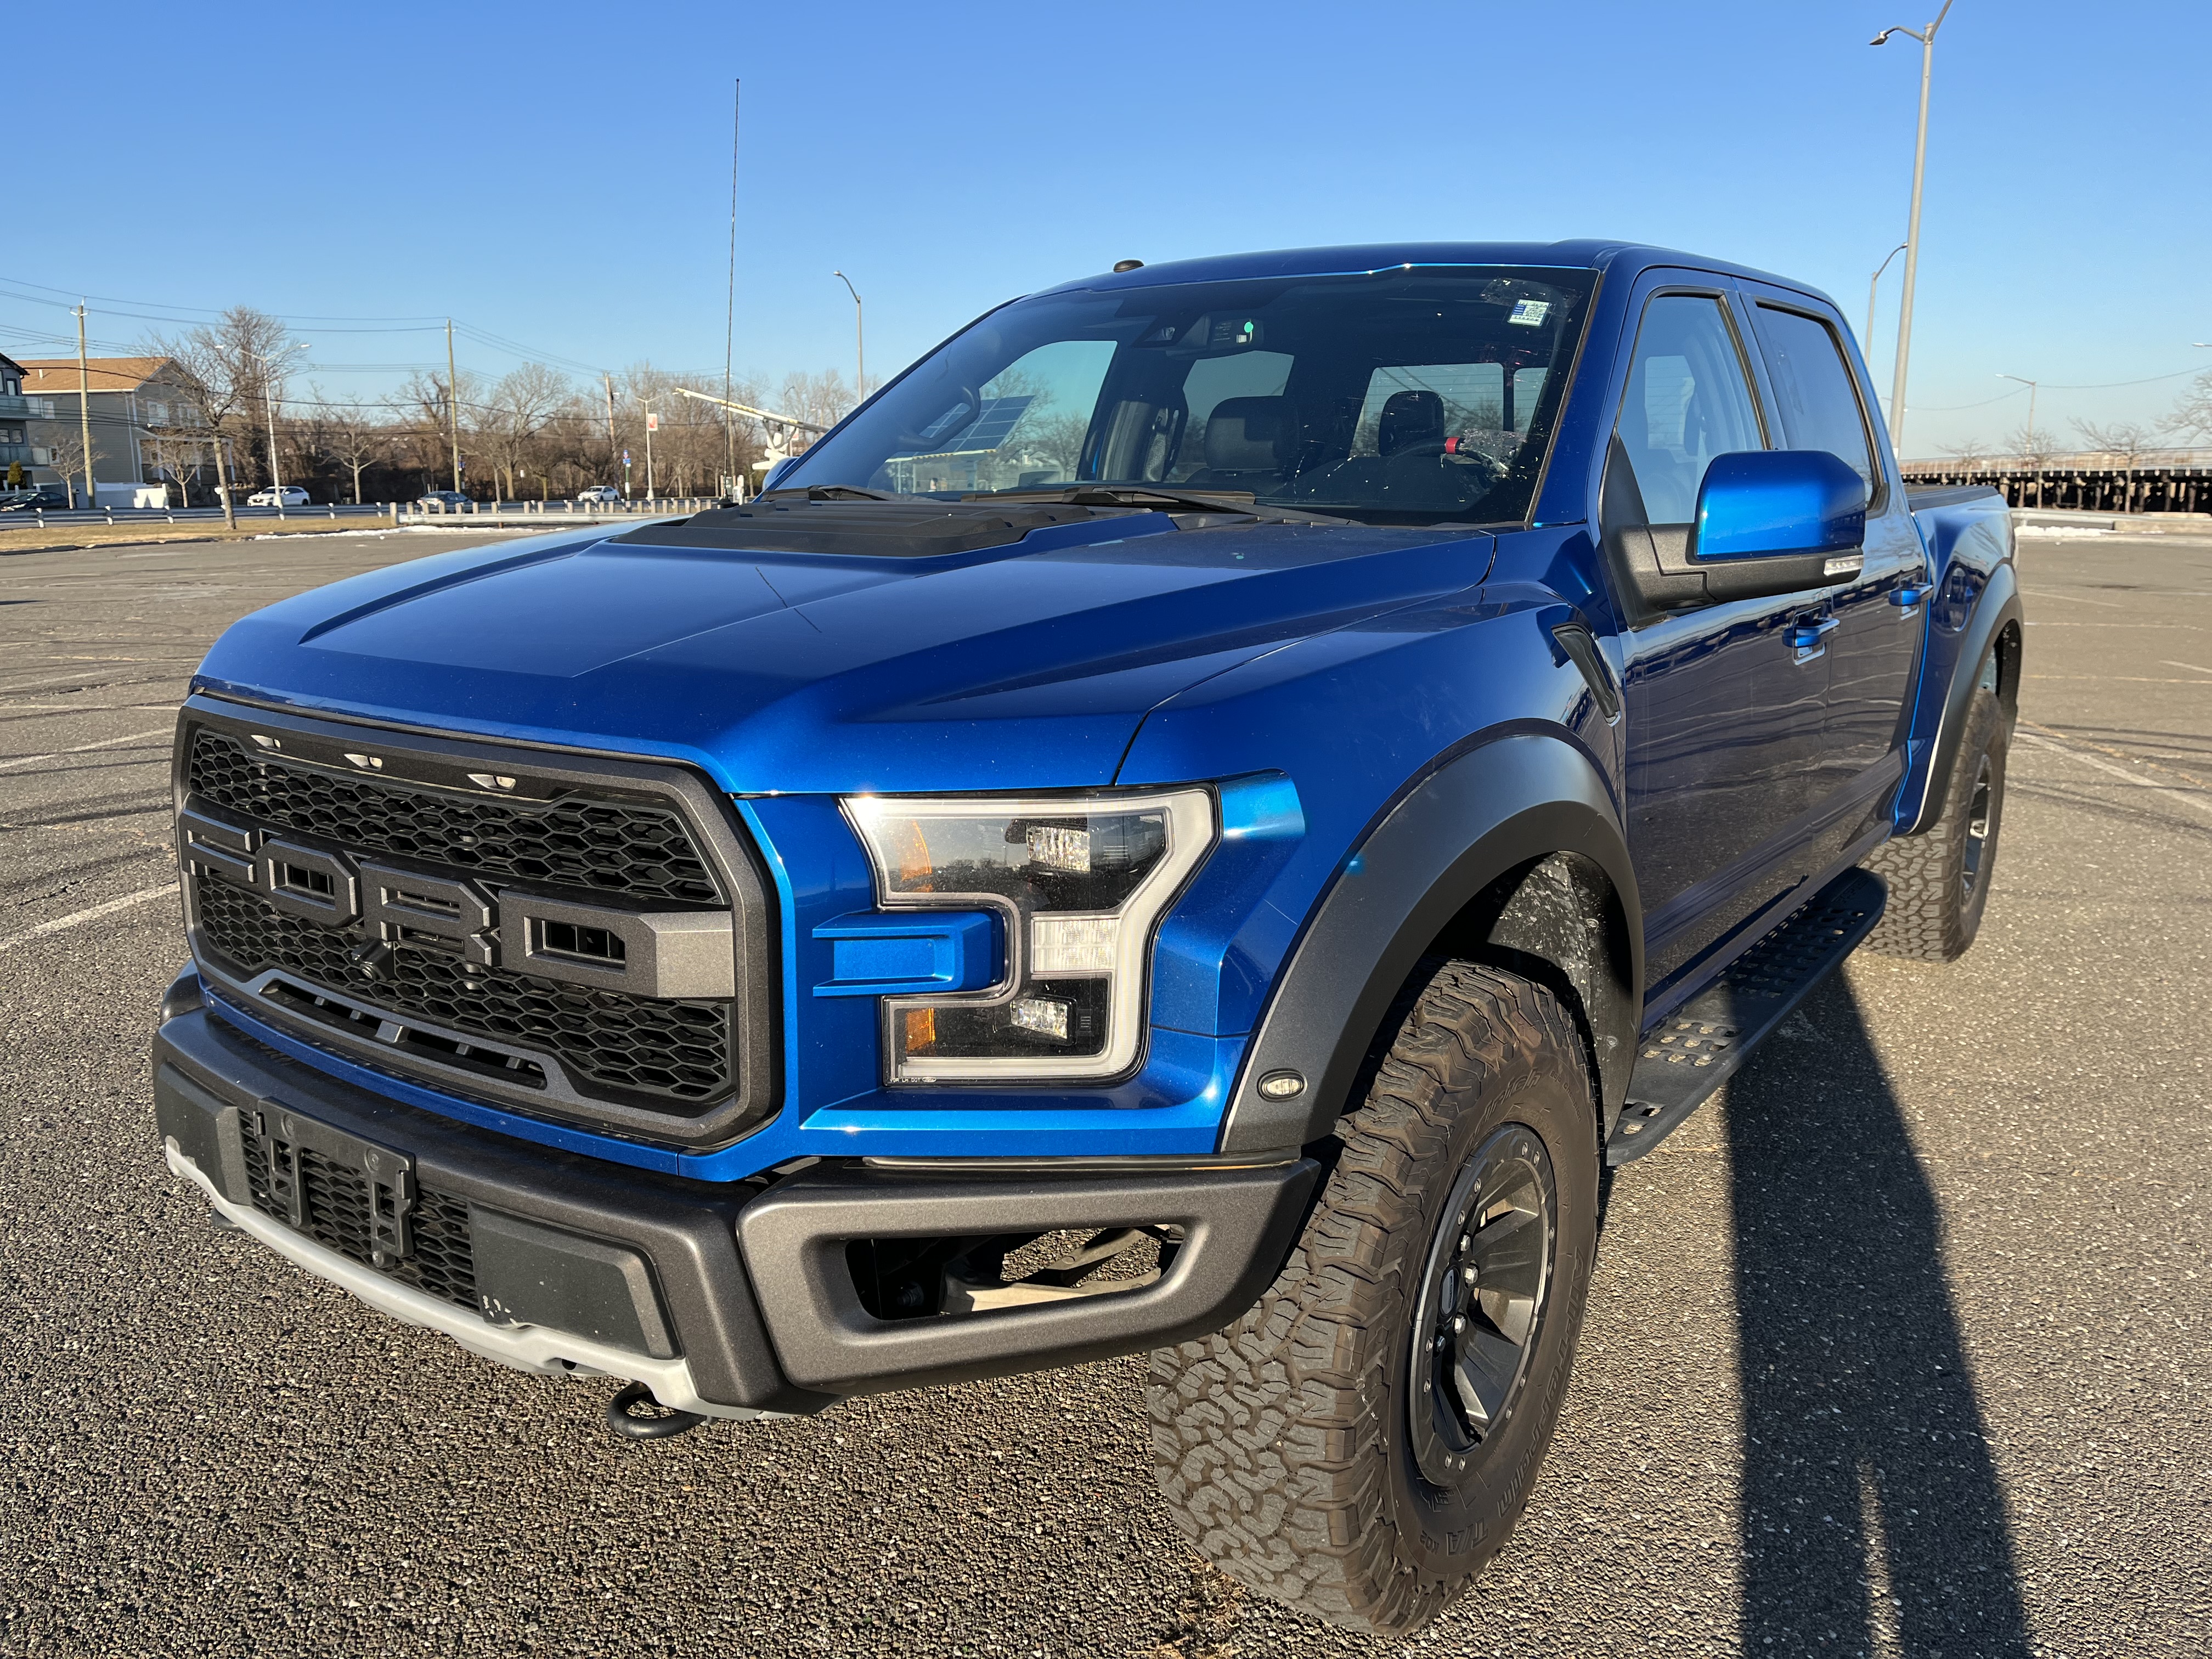 Used Car - 2018 Ford F-150 Raptor 4x4 SuperCrew for Sale in Staten Island, NY